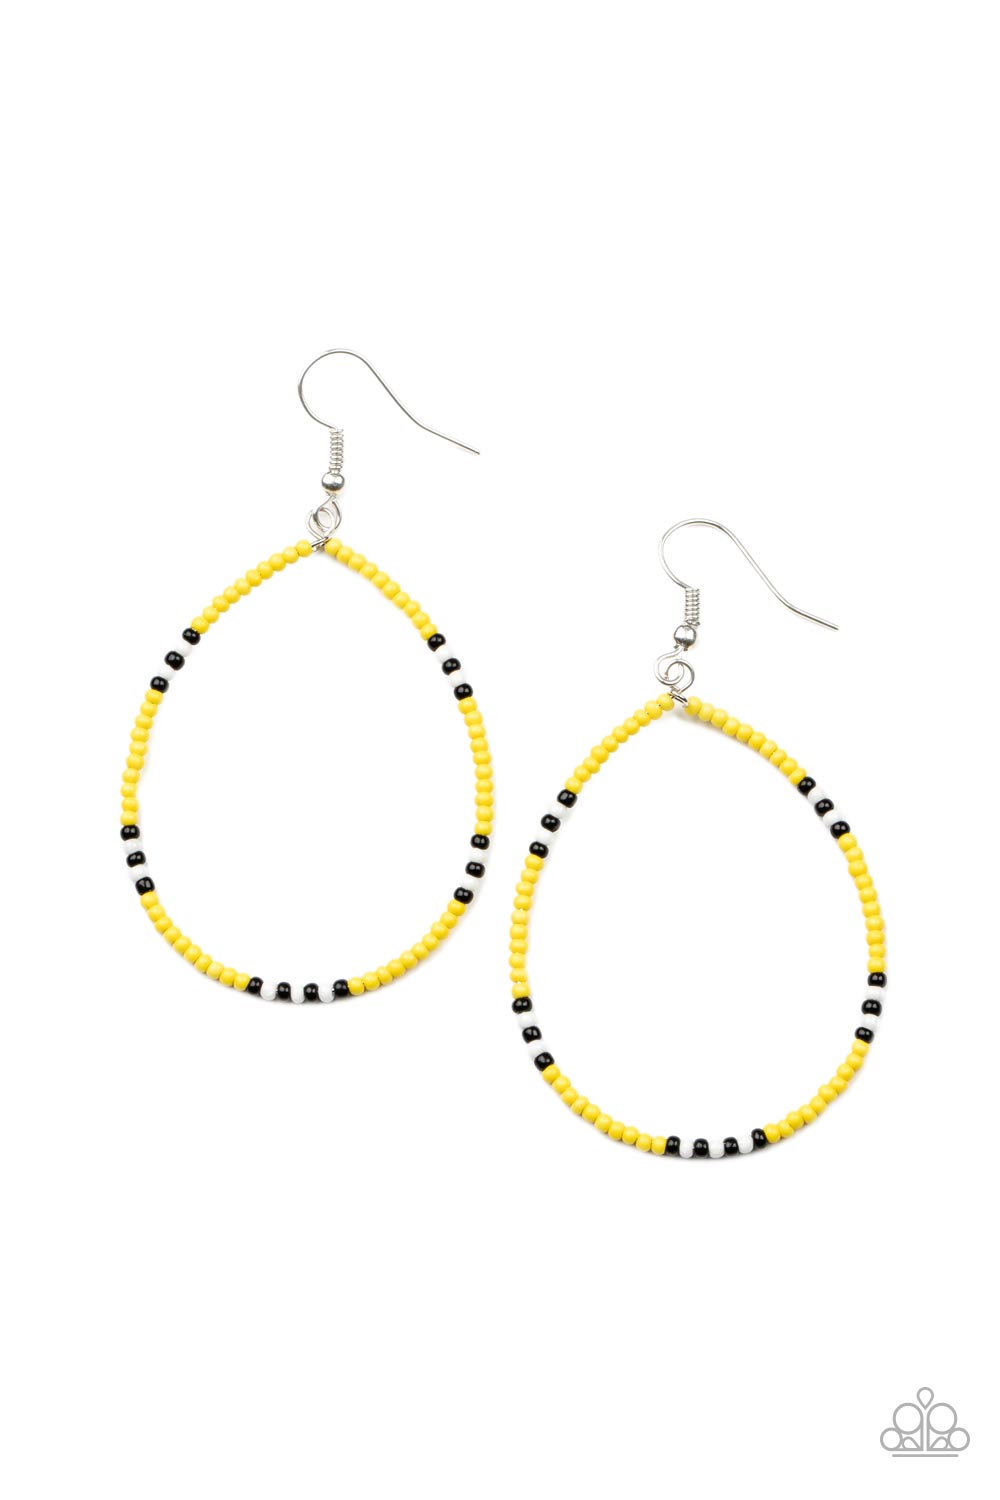 Broken up with sections of black and white seed beads, a dainty collection of Illuminating seed beads are threaded along an invisible wire, creating a colorful teardrop. Earring attaches to a standard fishhook fitting.